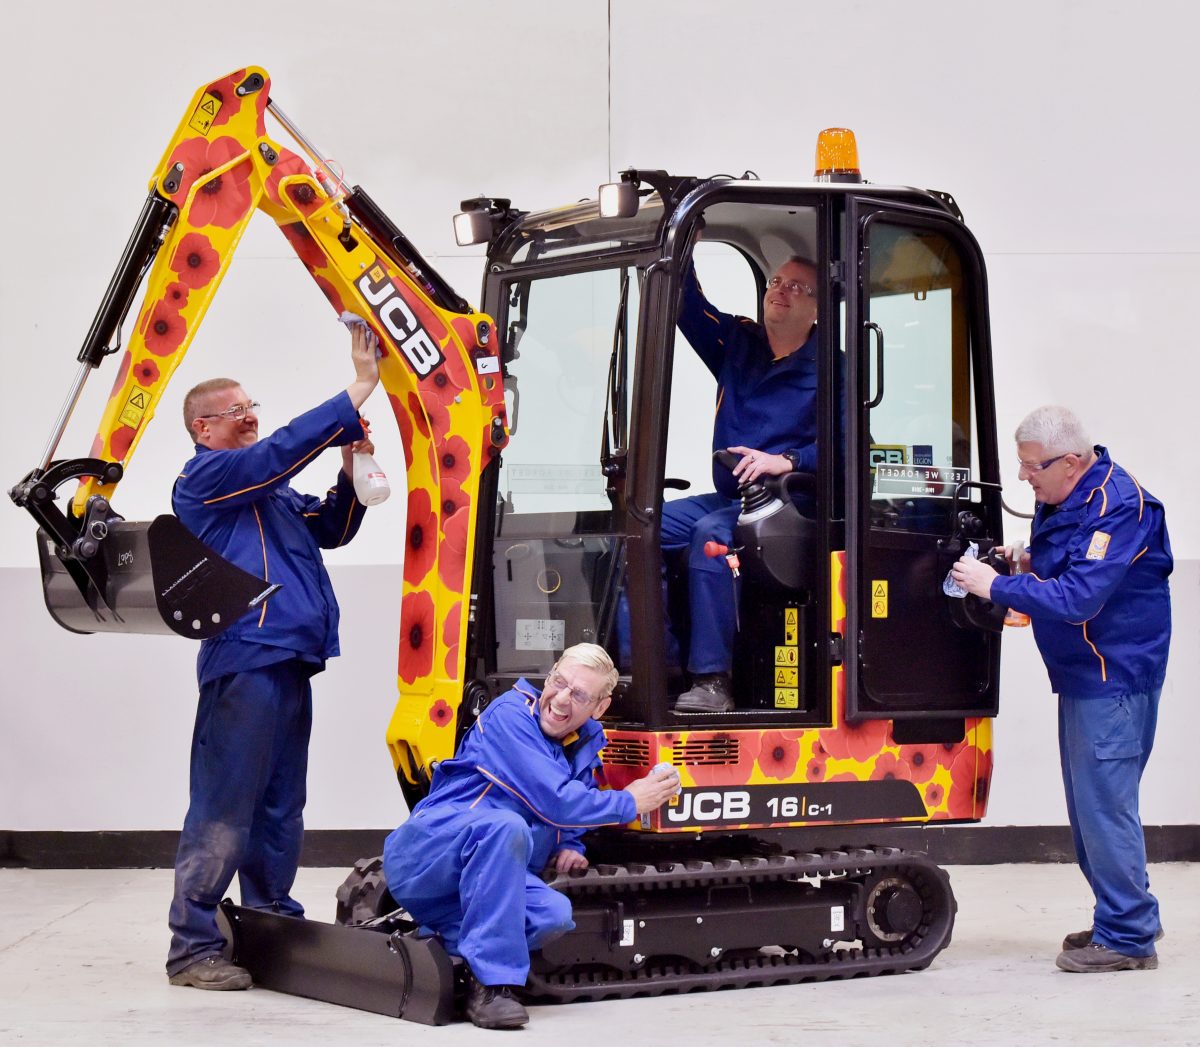 JCB auctions off customised digger for The Royal British Legion